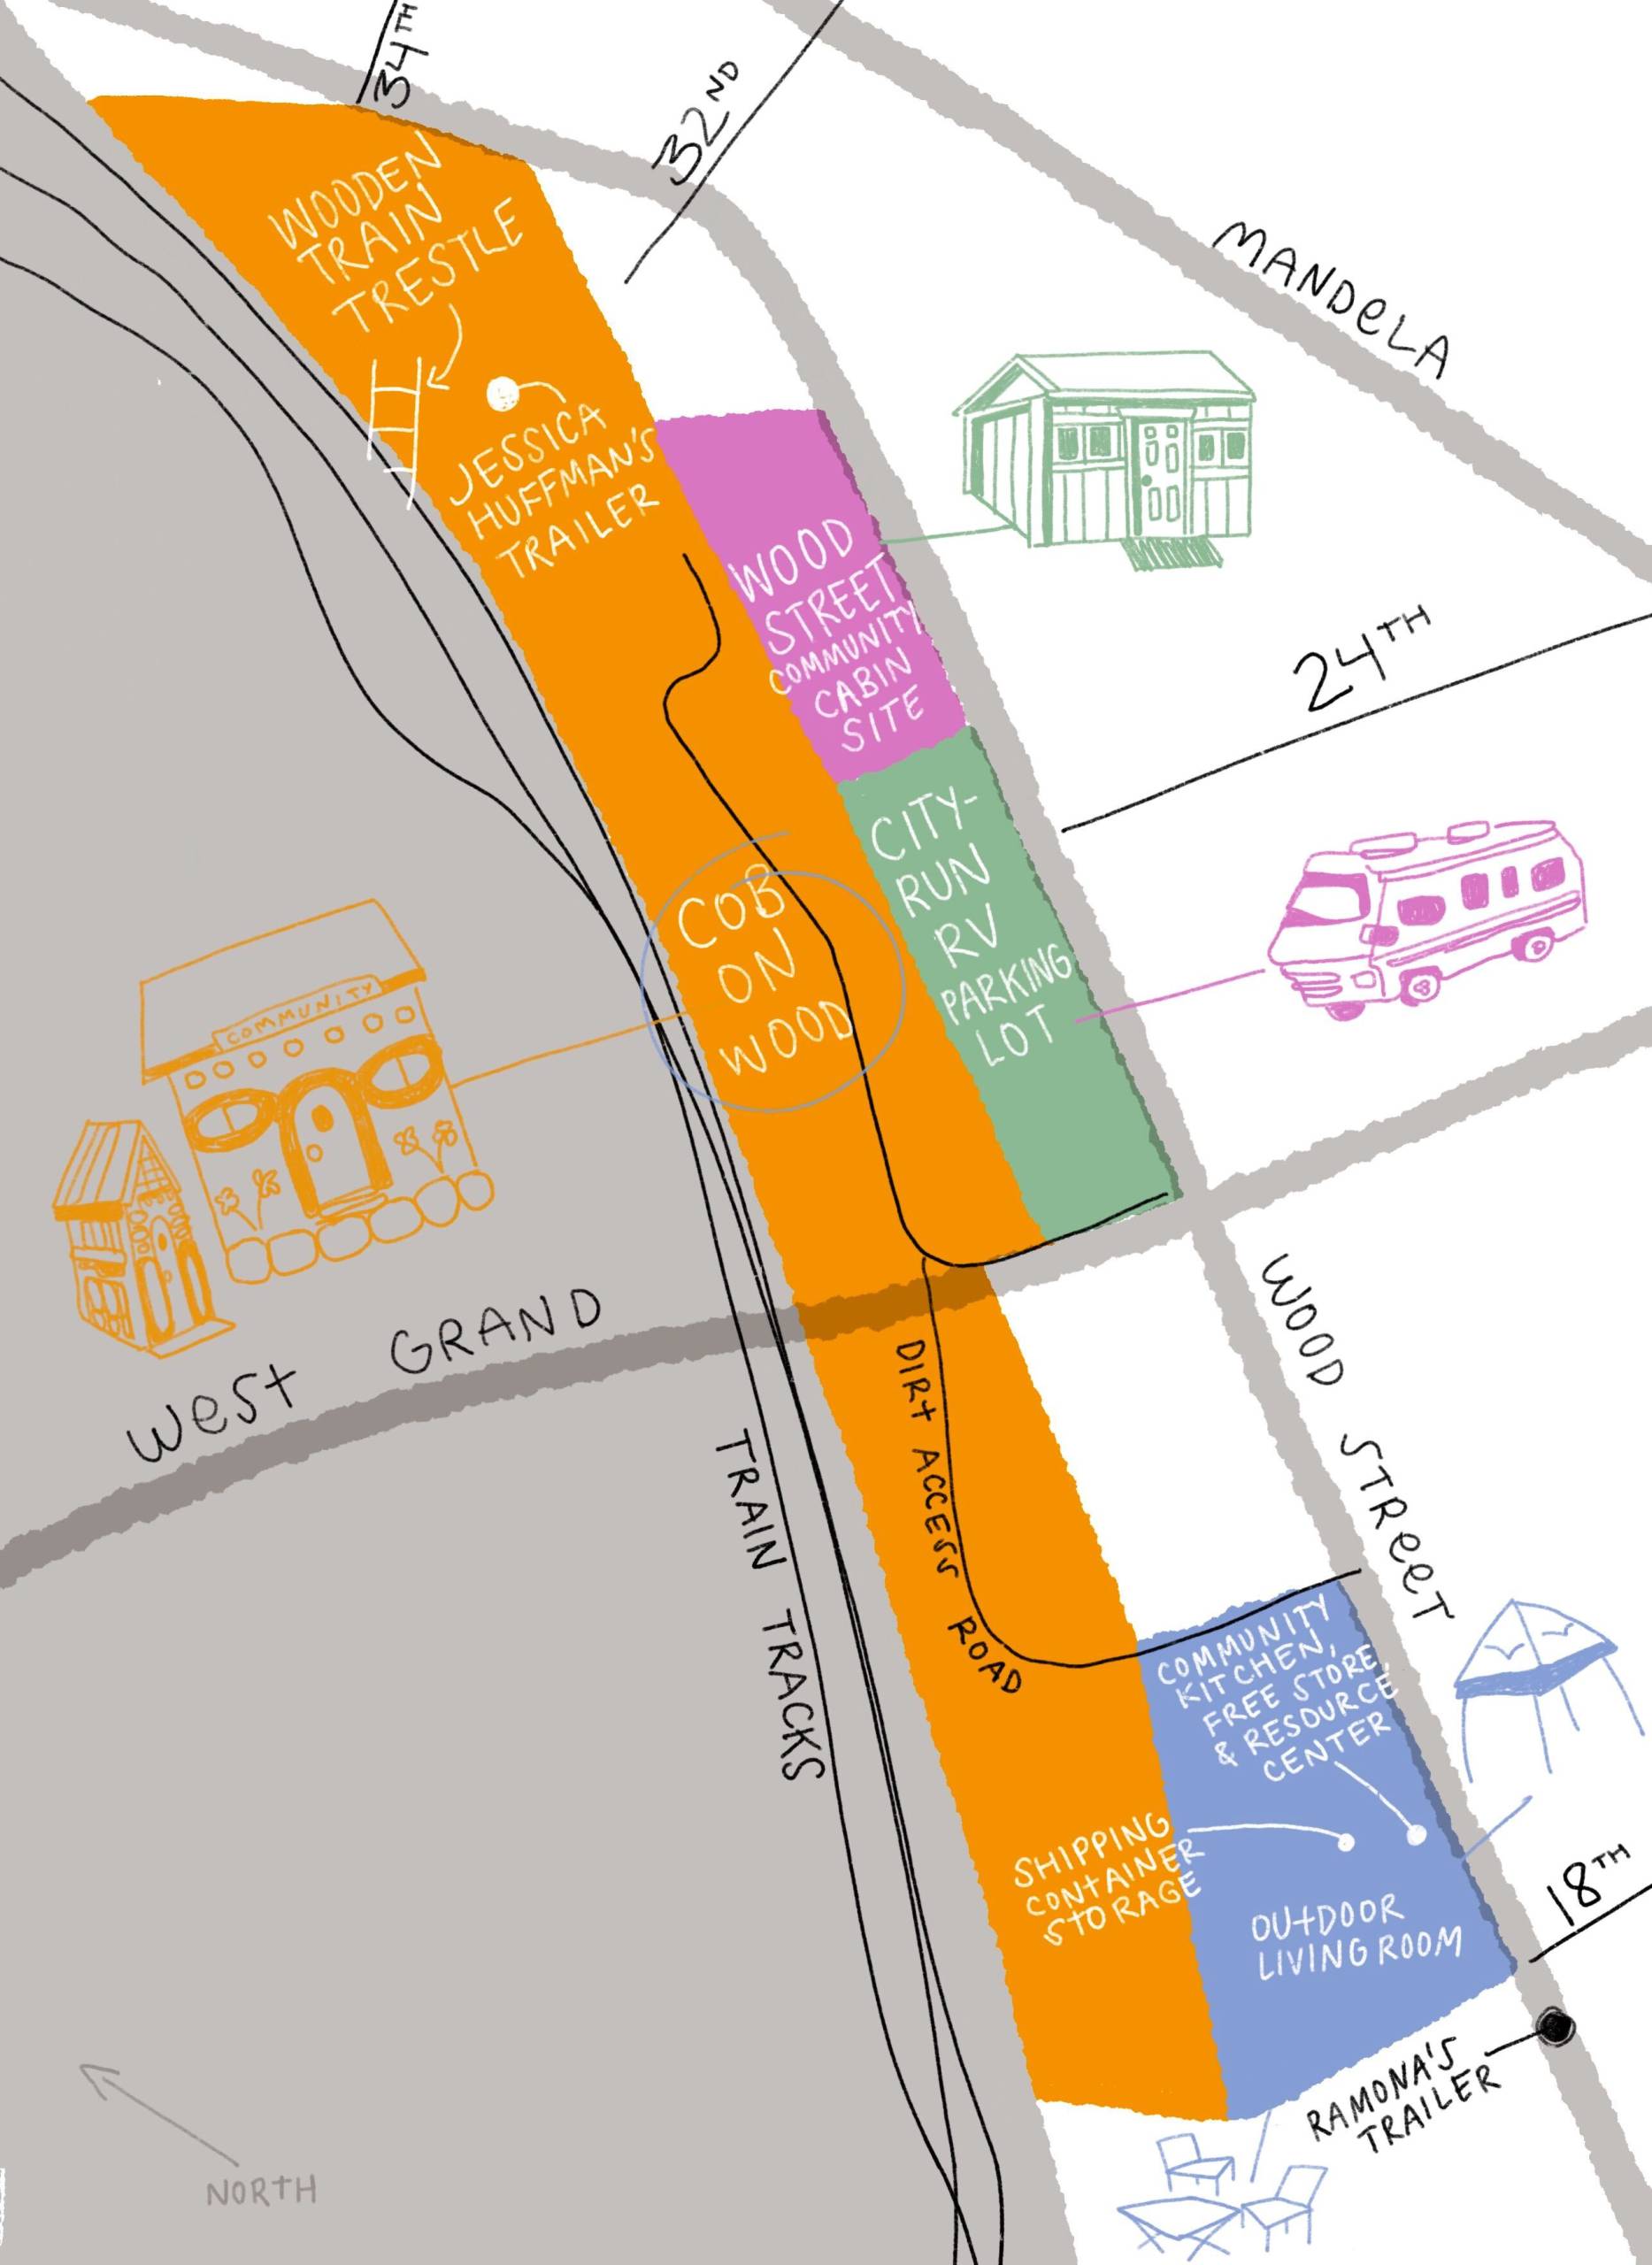 A colorful illustration of a map of the Wood Street encampment located in West Oakland.